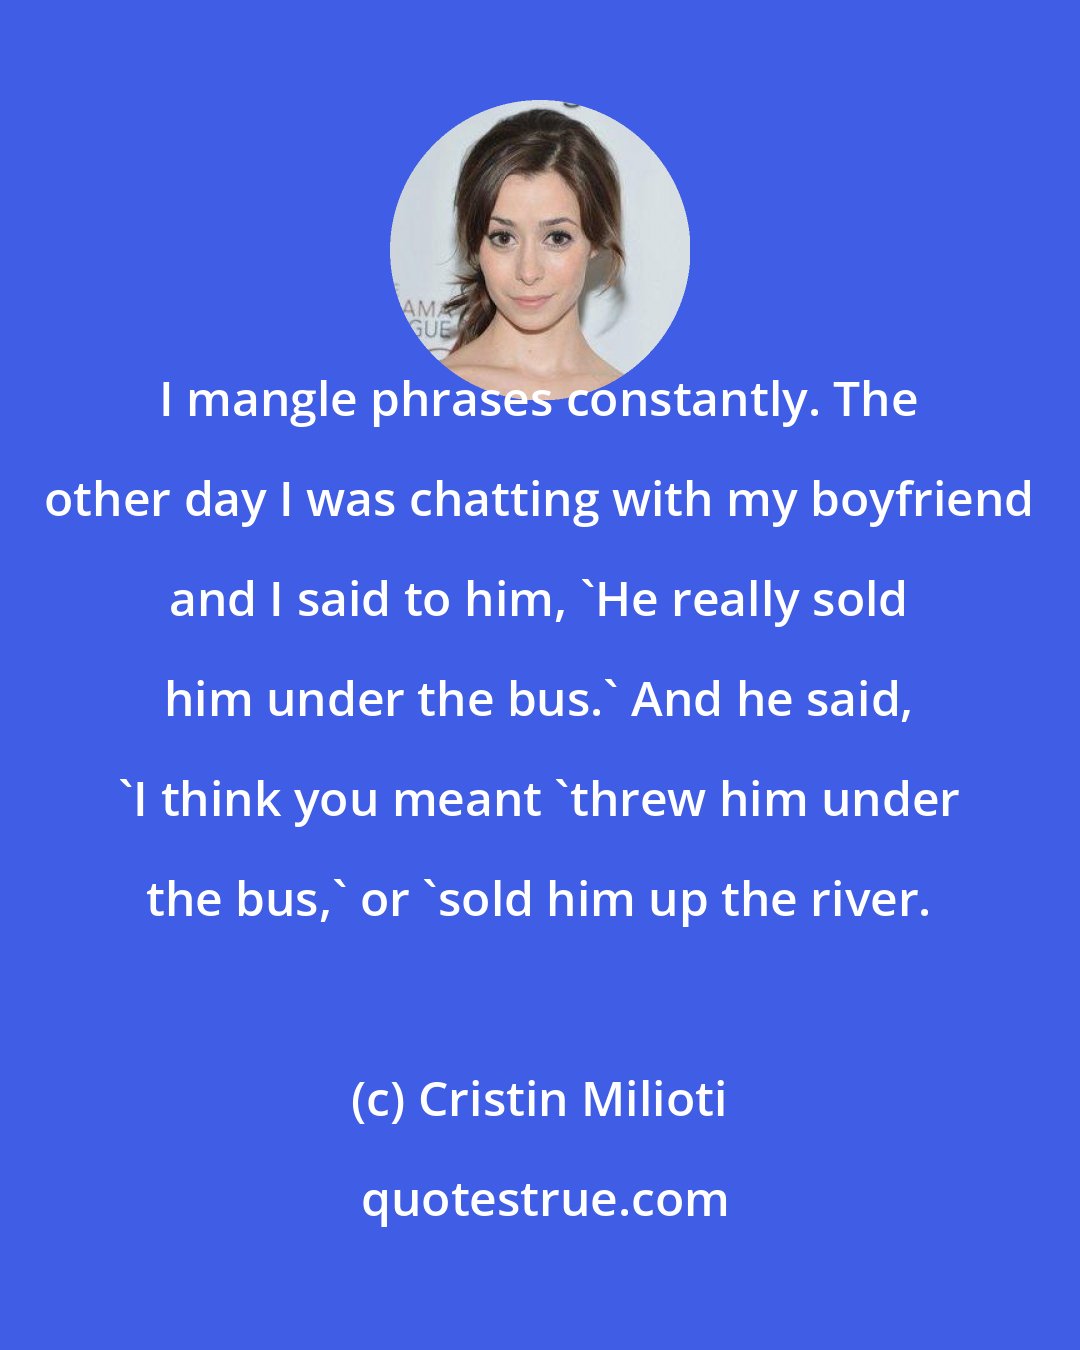 Cristin Milioti: I mangle phrases constantly. The other day I was chatting with my boyfriend and I said to him, 'He really sold him under the bus.' And he said, 'I think you meant 'threw him under the bus,' or 'sold him up the river.